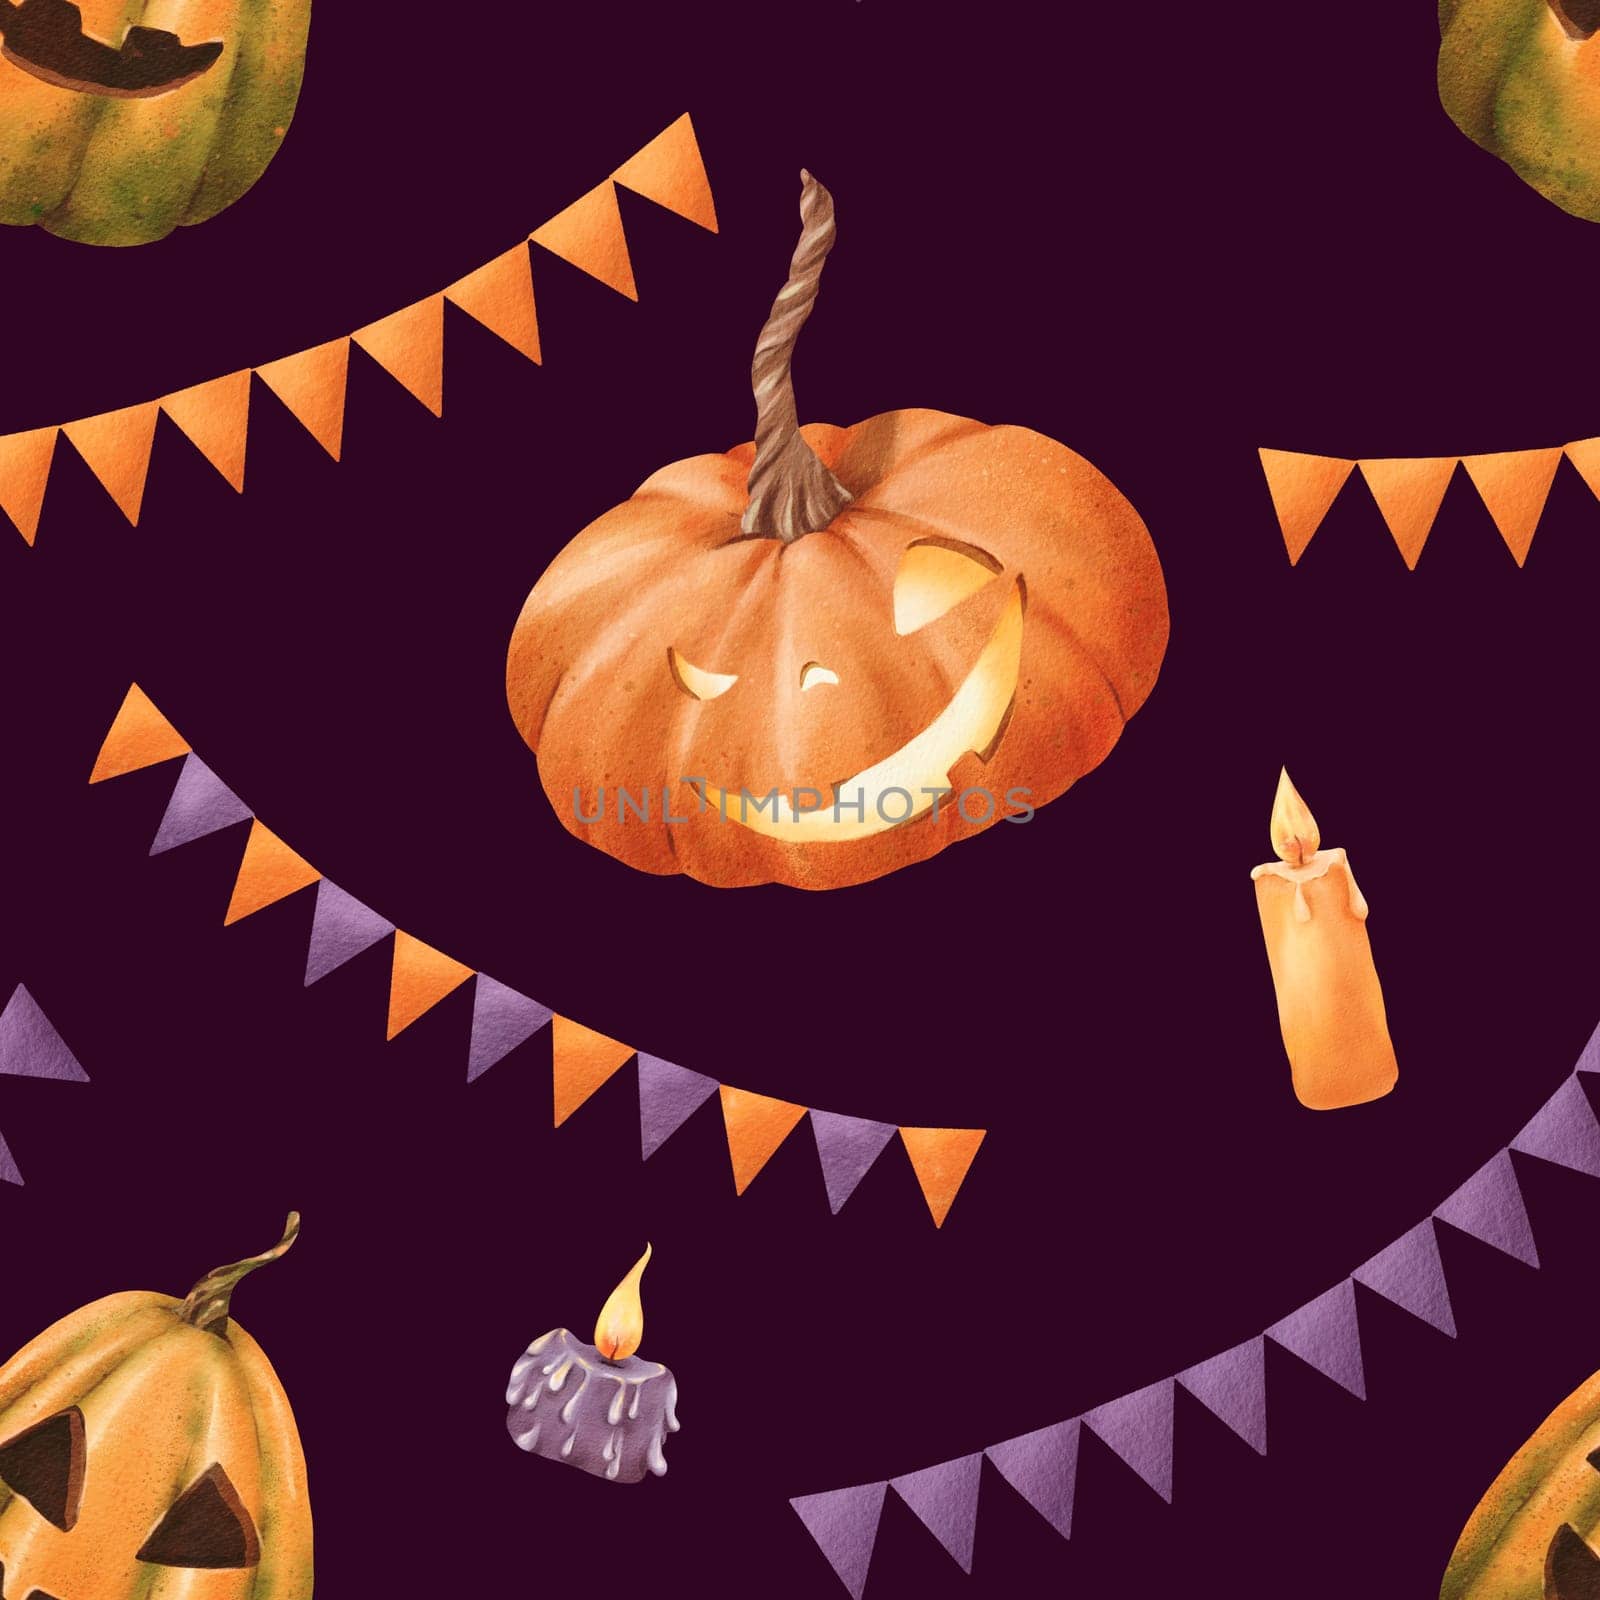 Seamless Halloween pattern. vibrant orange pumpkins with carved faces orange and purple candles festive flags garlands. Classic holiday elements in a watercolor illustration. Dark background by Art_Mari_Ka